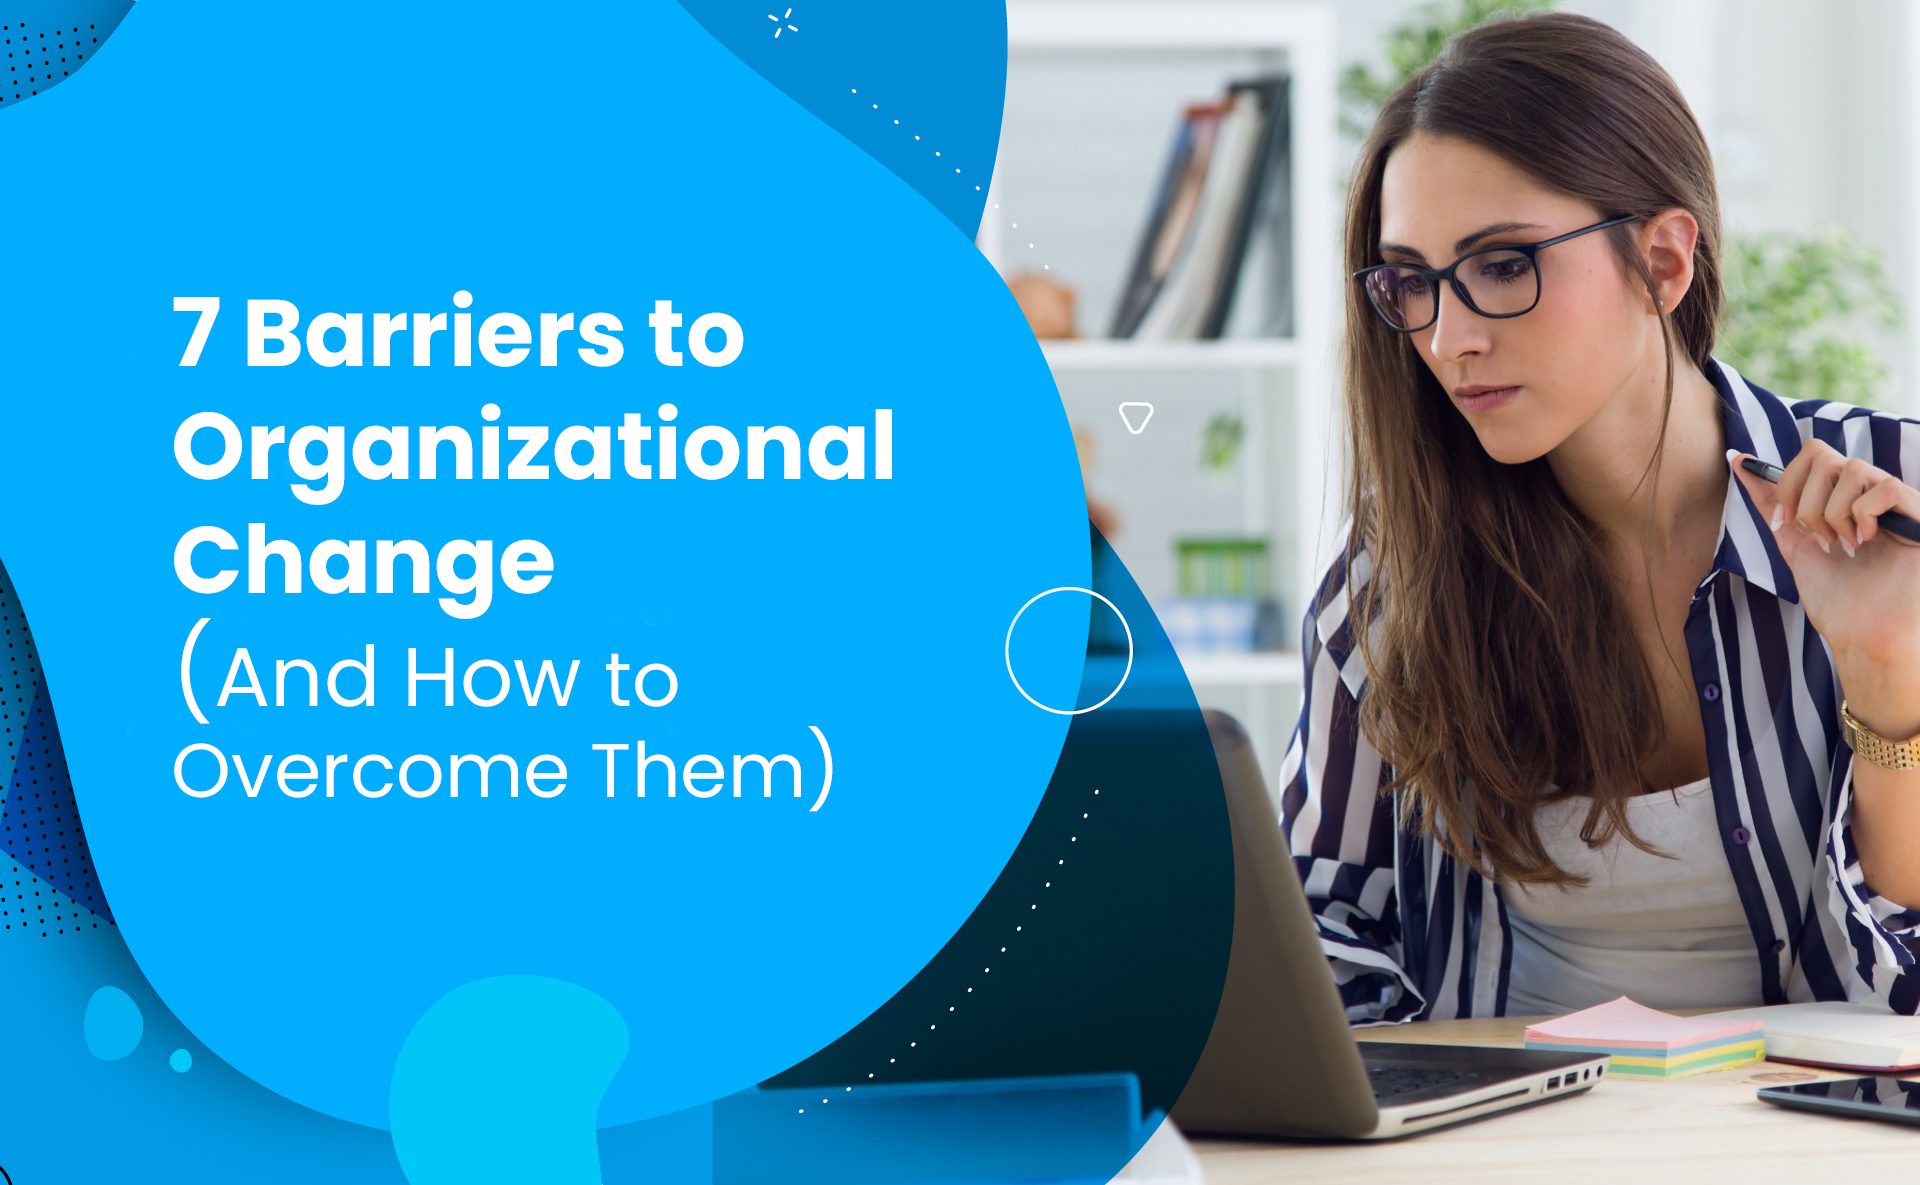 7 barrier to organizational change & how to overcome them